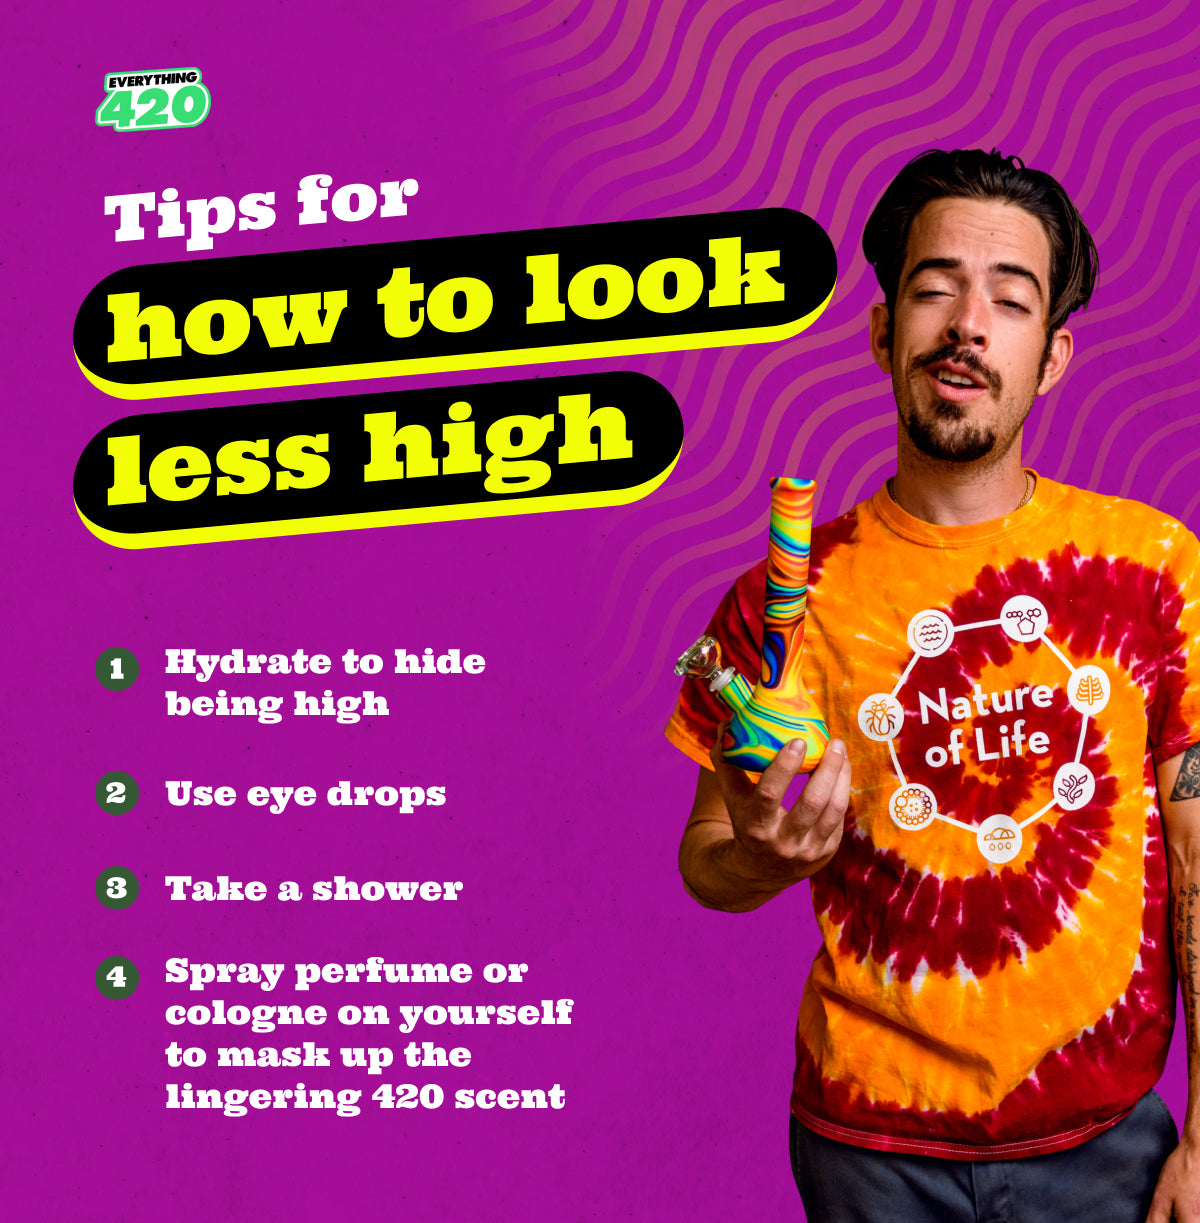 Tips for how to look less high